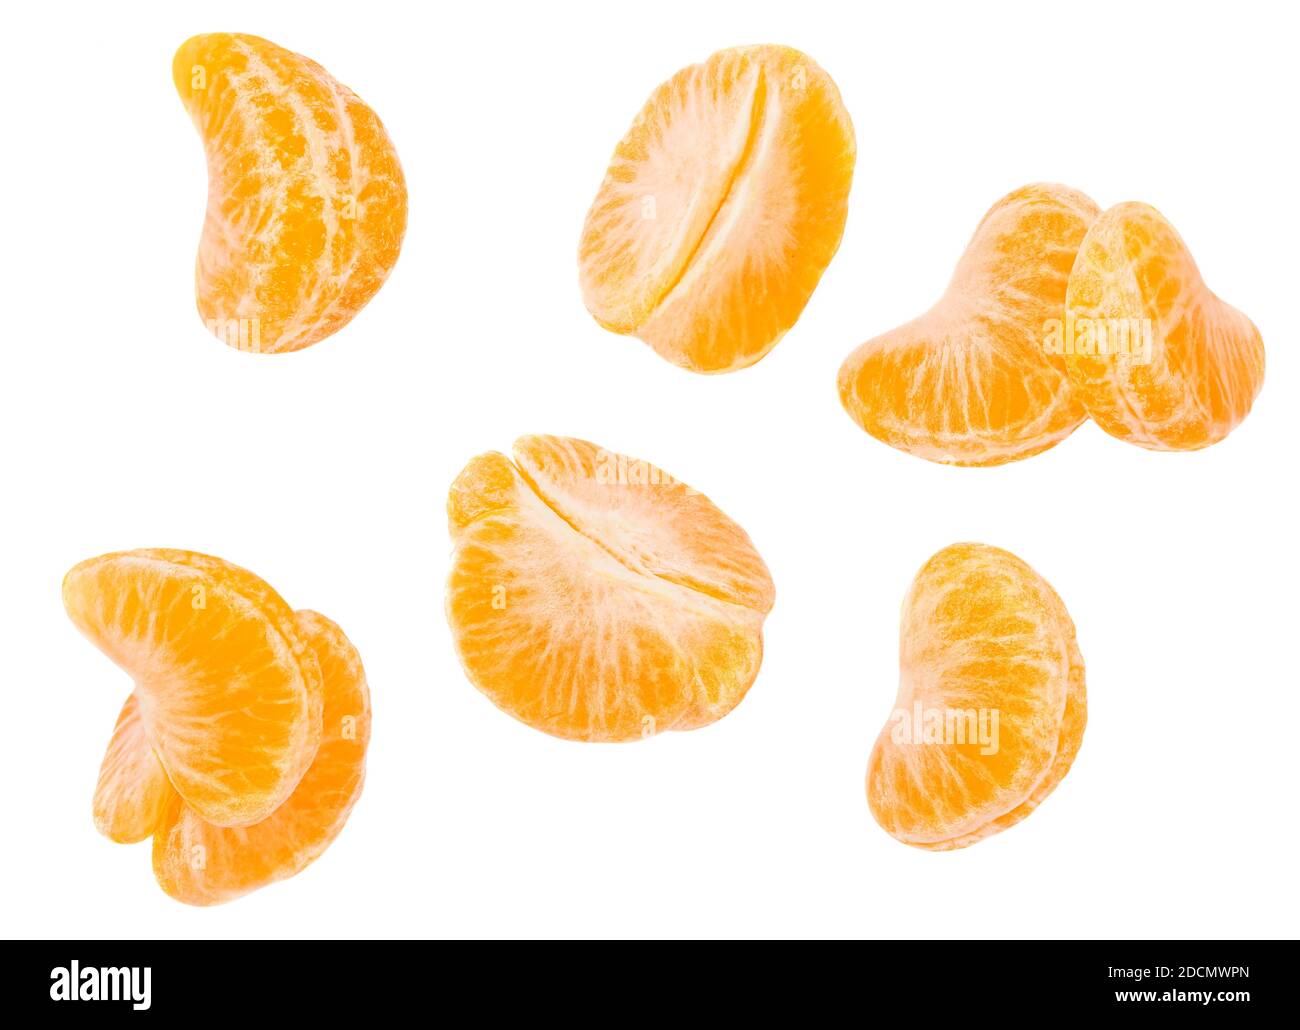 Fresh Mandarines, tangerine, clementine slices  isolated on white background. Pattern. Top view. Flat lay Stock Photo